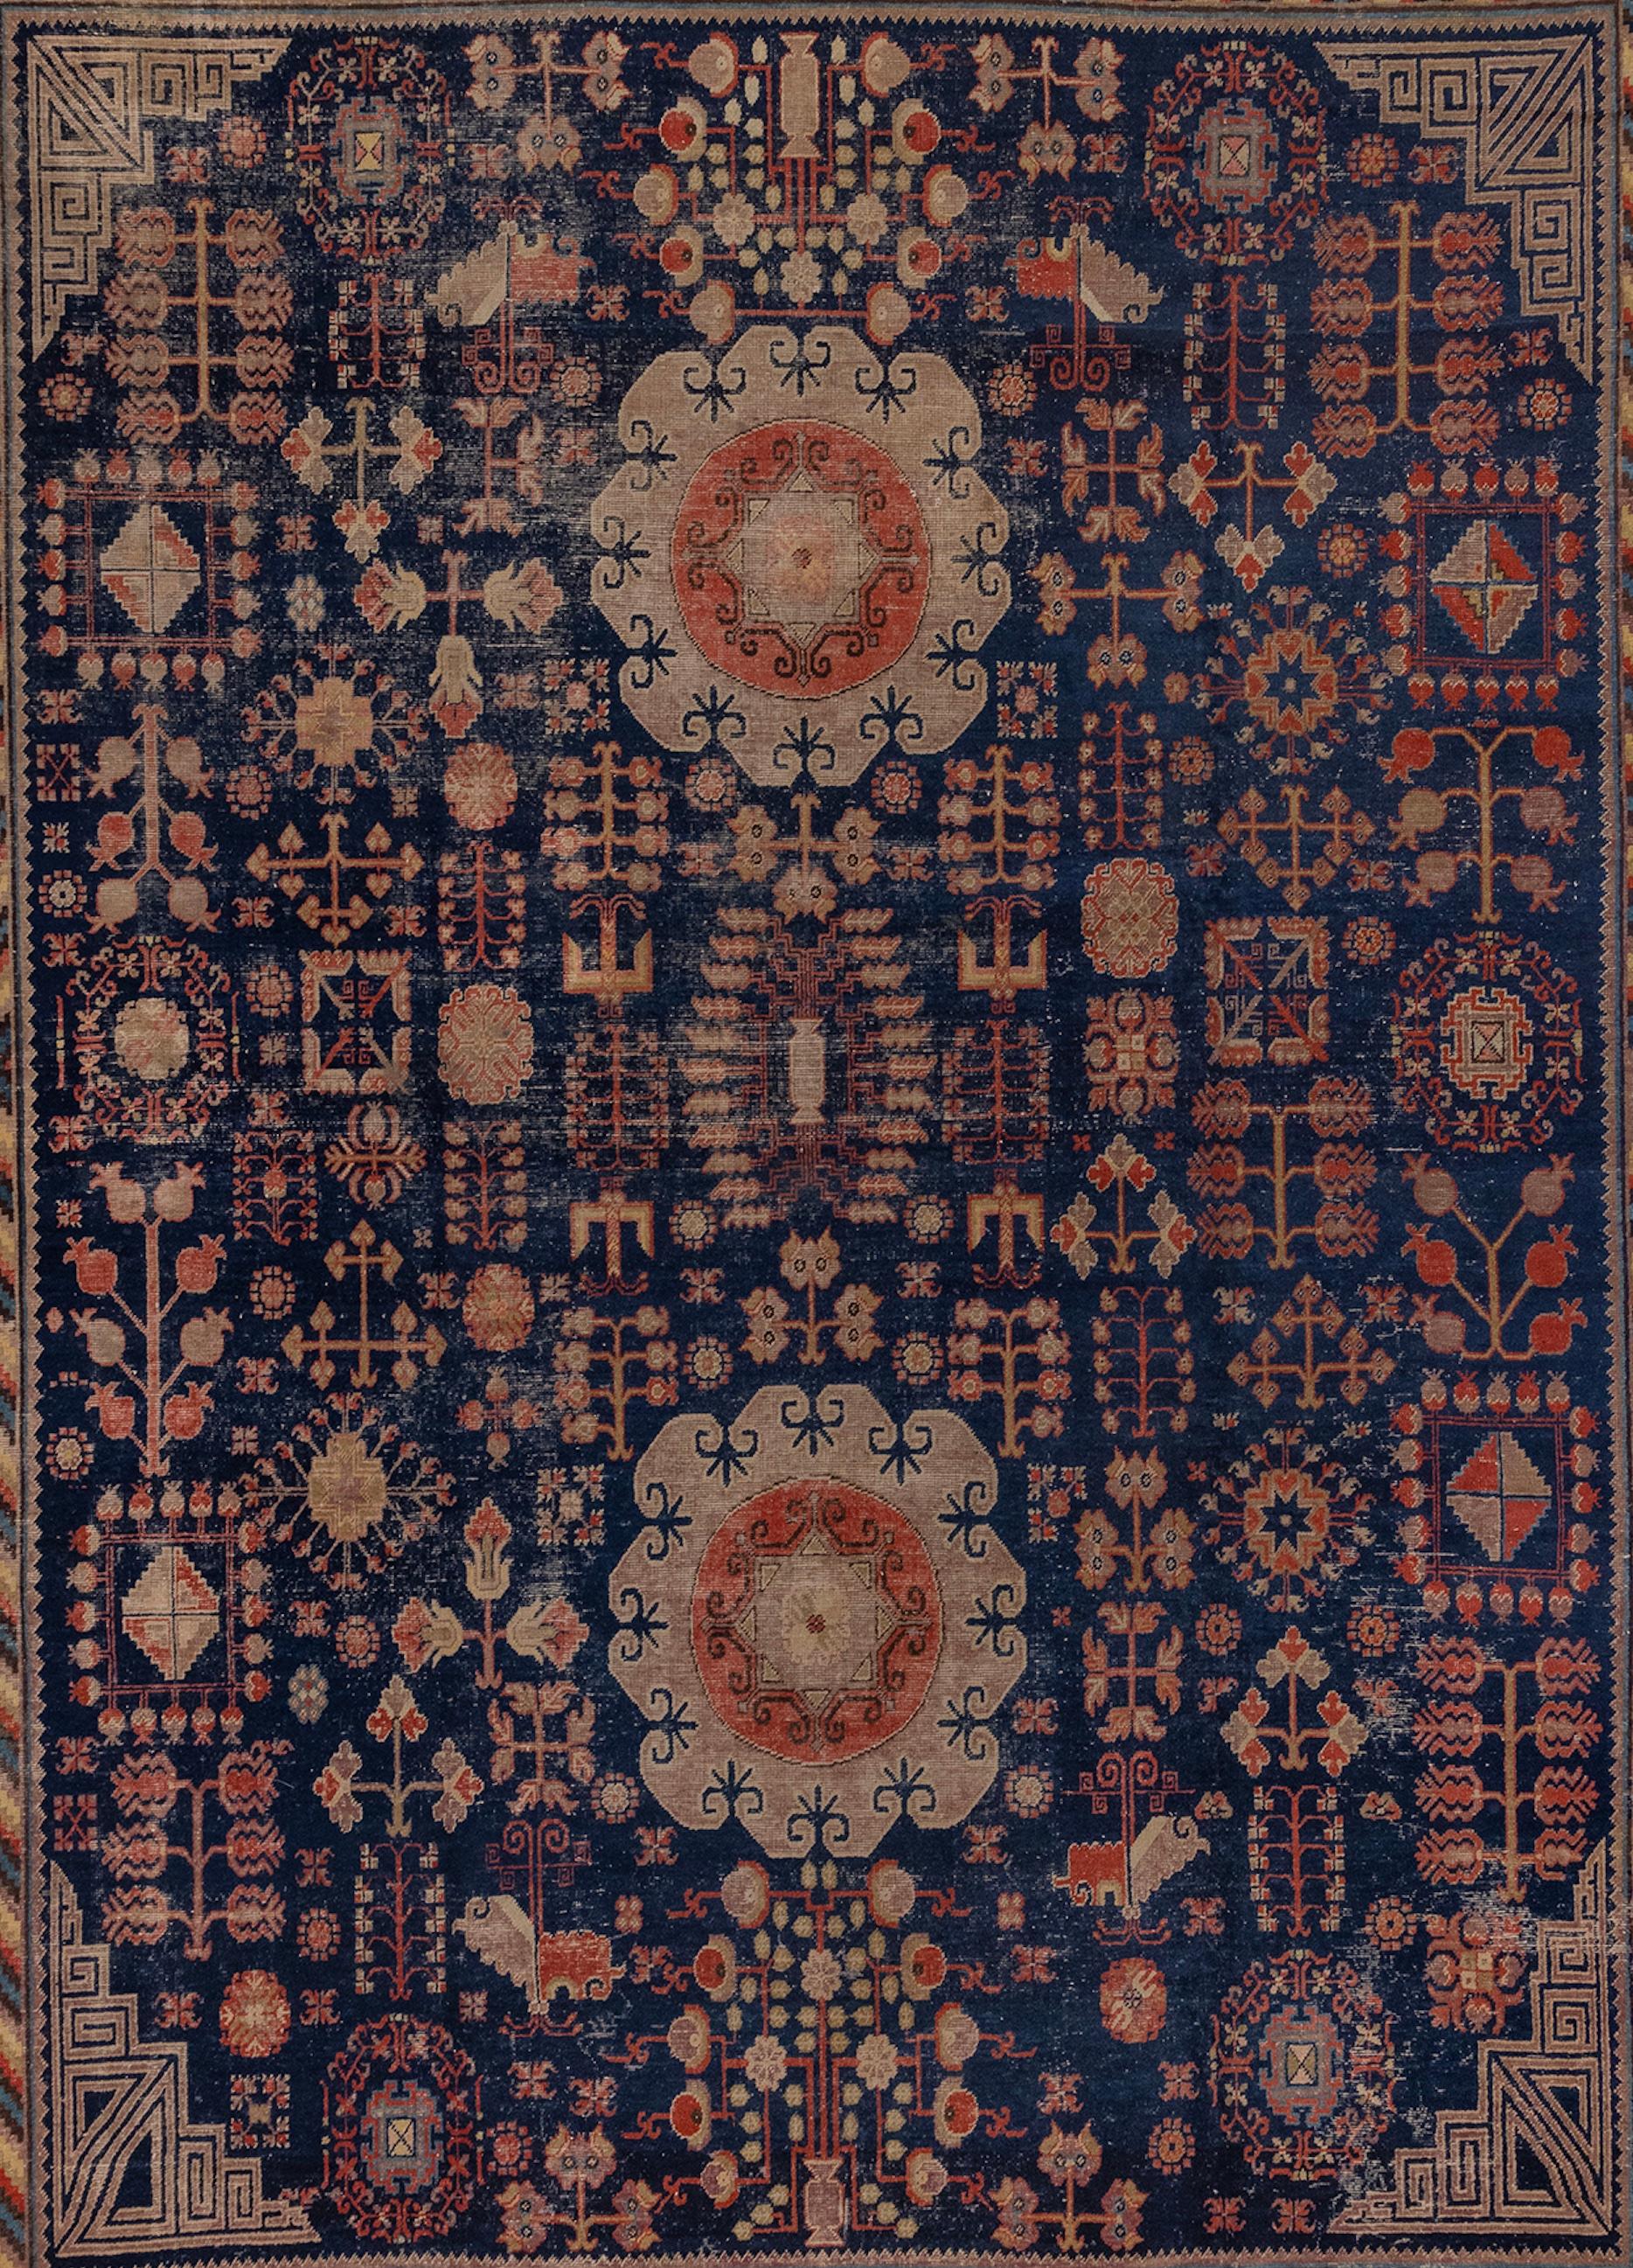 Beautiful Khotan Rug with unique medallions and tree of life pattern throughout. The border is beautifully detailed with colorful stripes and pomegranite symbols. This is a large rug, rare for this style of Khotan.